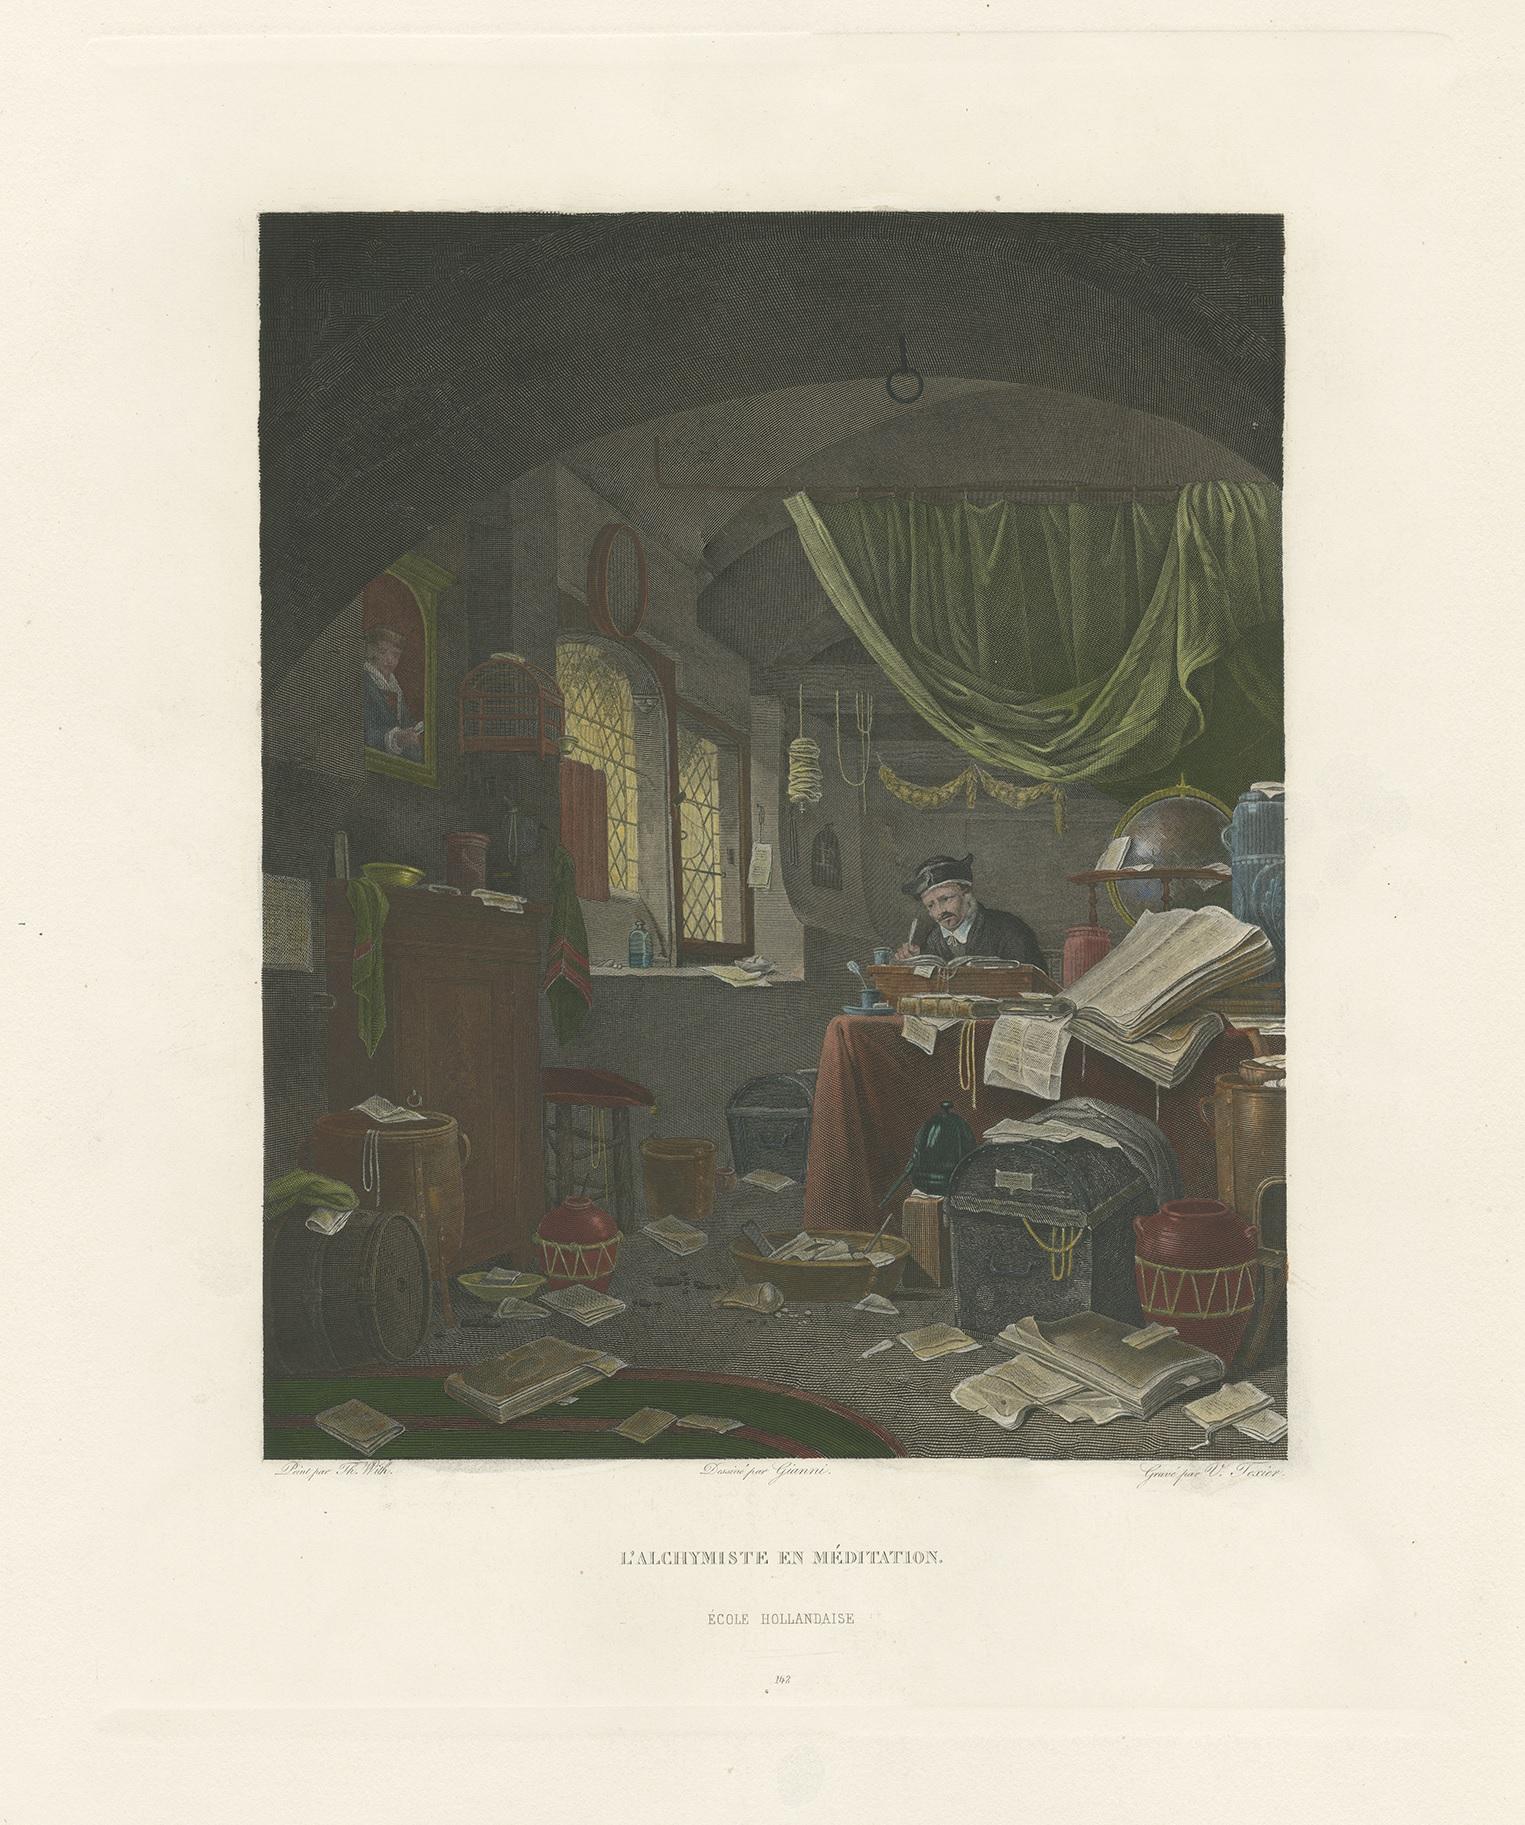 Antique print titled 'l'Alchymiste en Méditation'. Large antique print of an alchemist peacefully writing in a room strewn with papers. Engraving by V.A.L. Texier, published circa 1810.